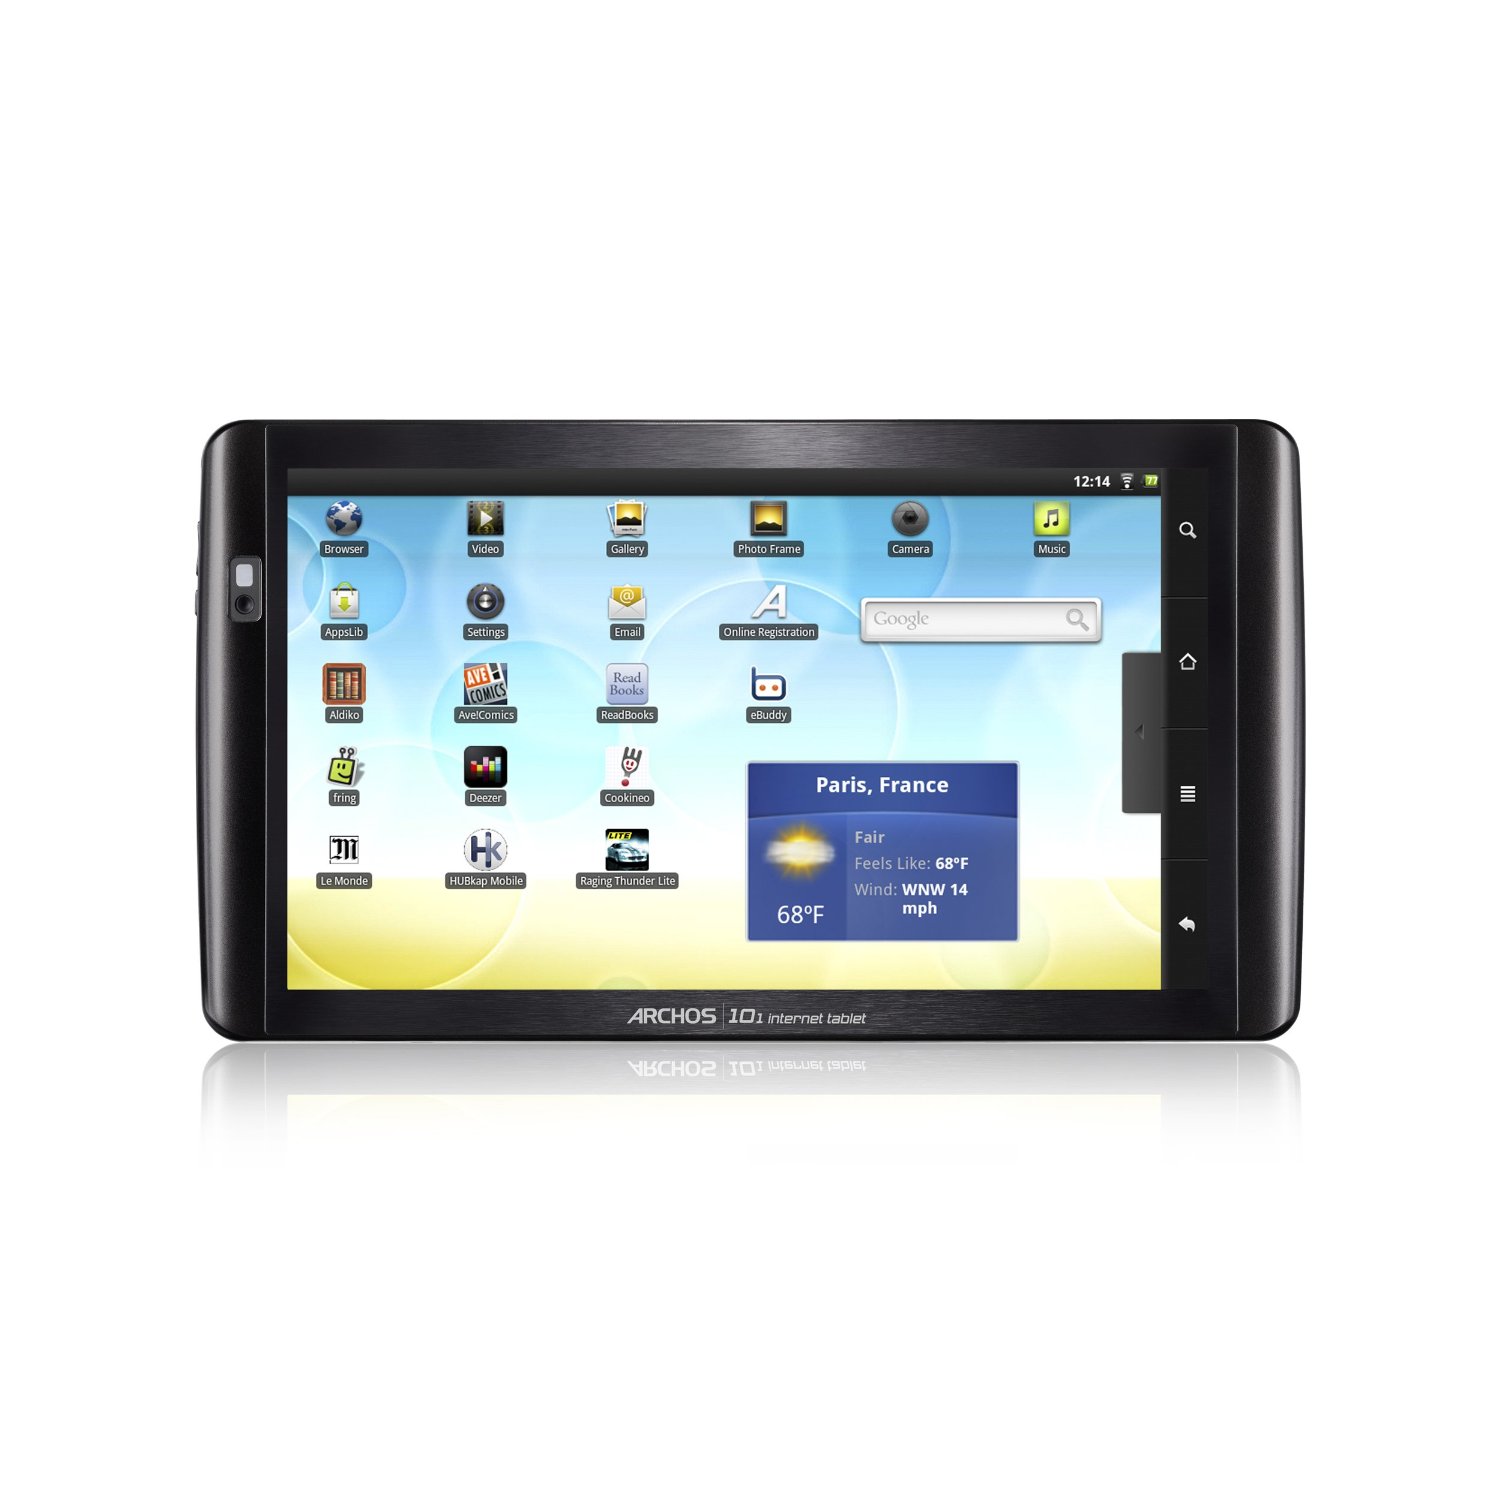 http://thetechjournal.com/wp-content/uploads/images/1108/1314386202-archos-101-android-powered-internet-tablet-8gb-1.jpg